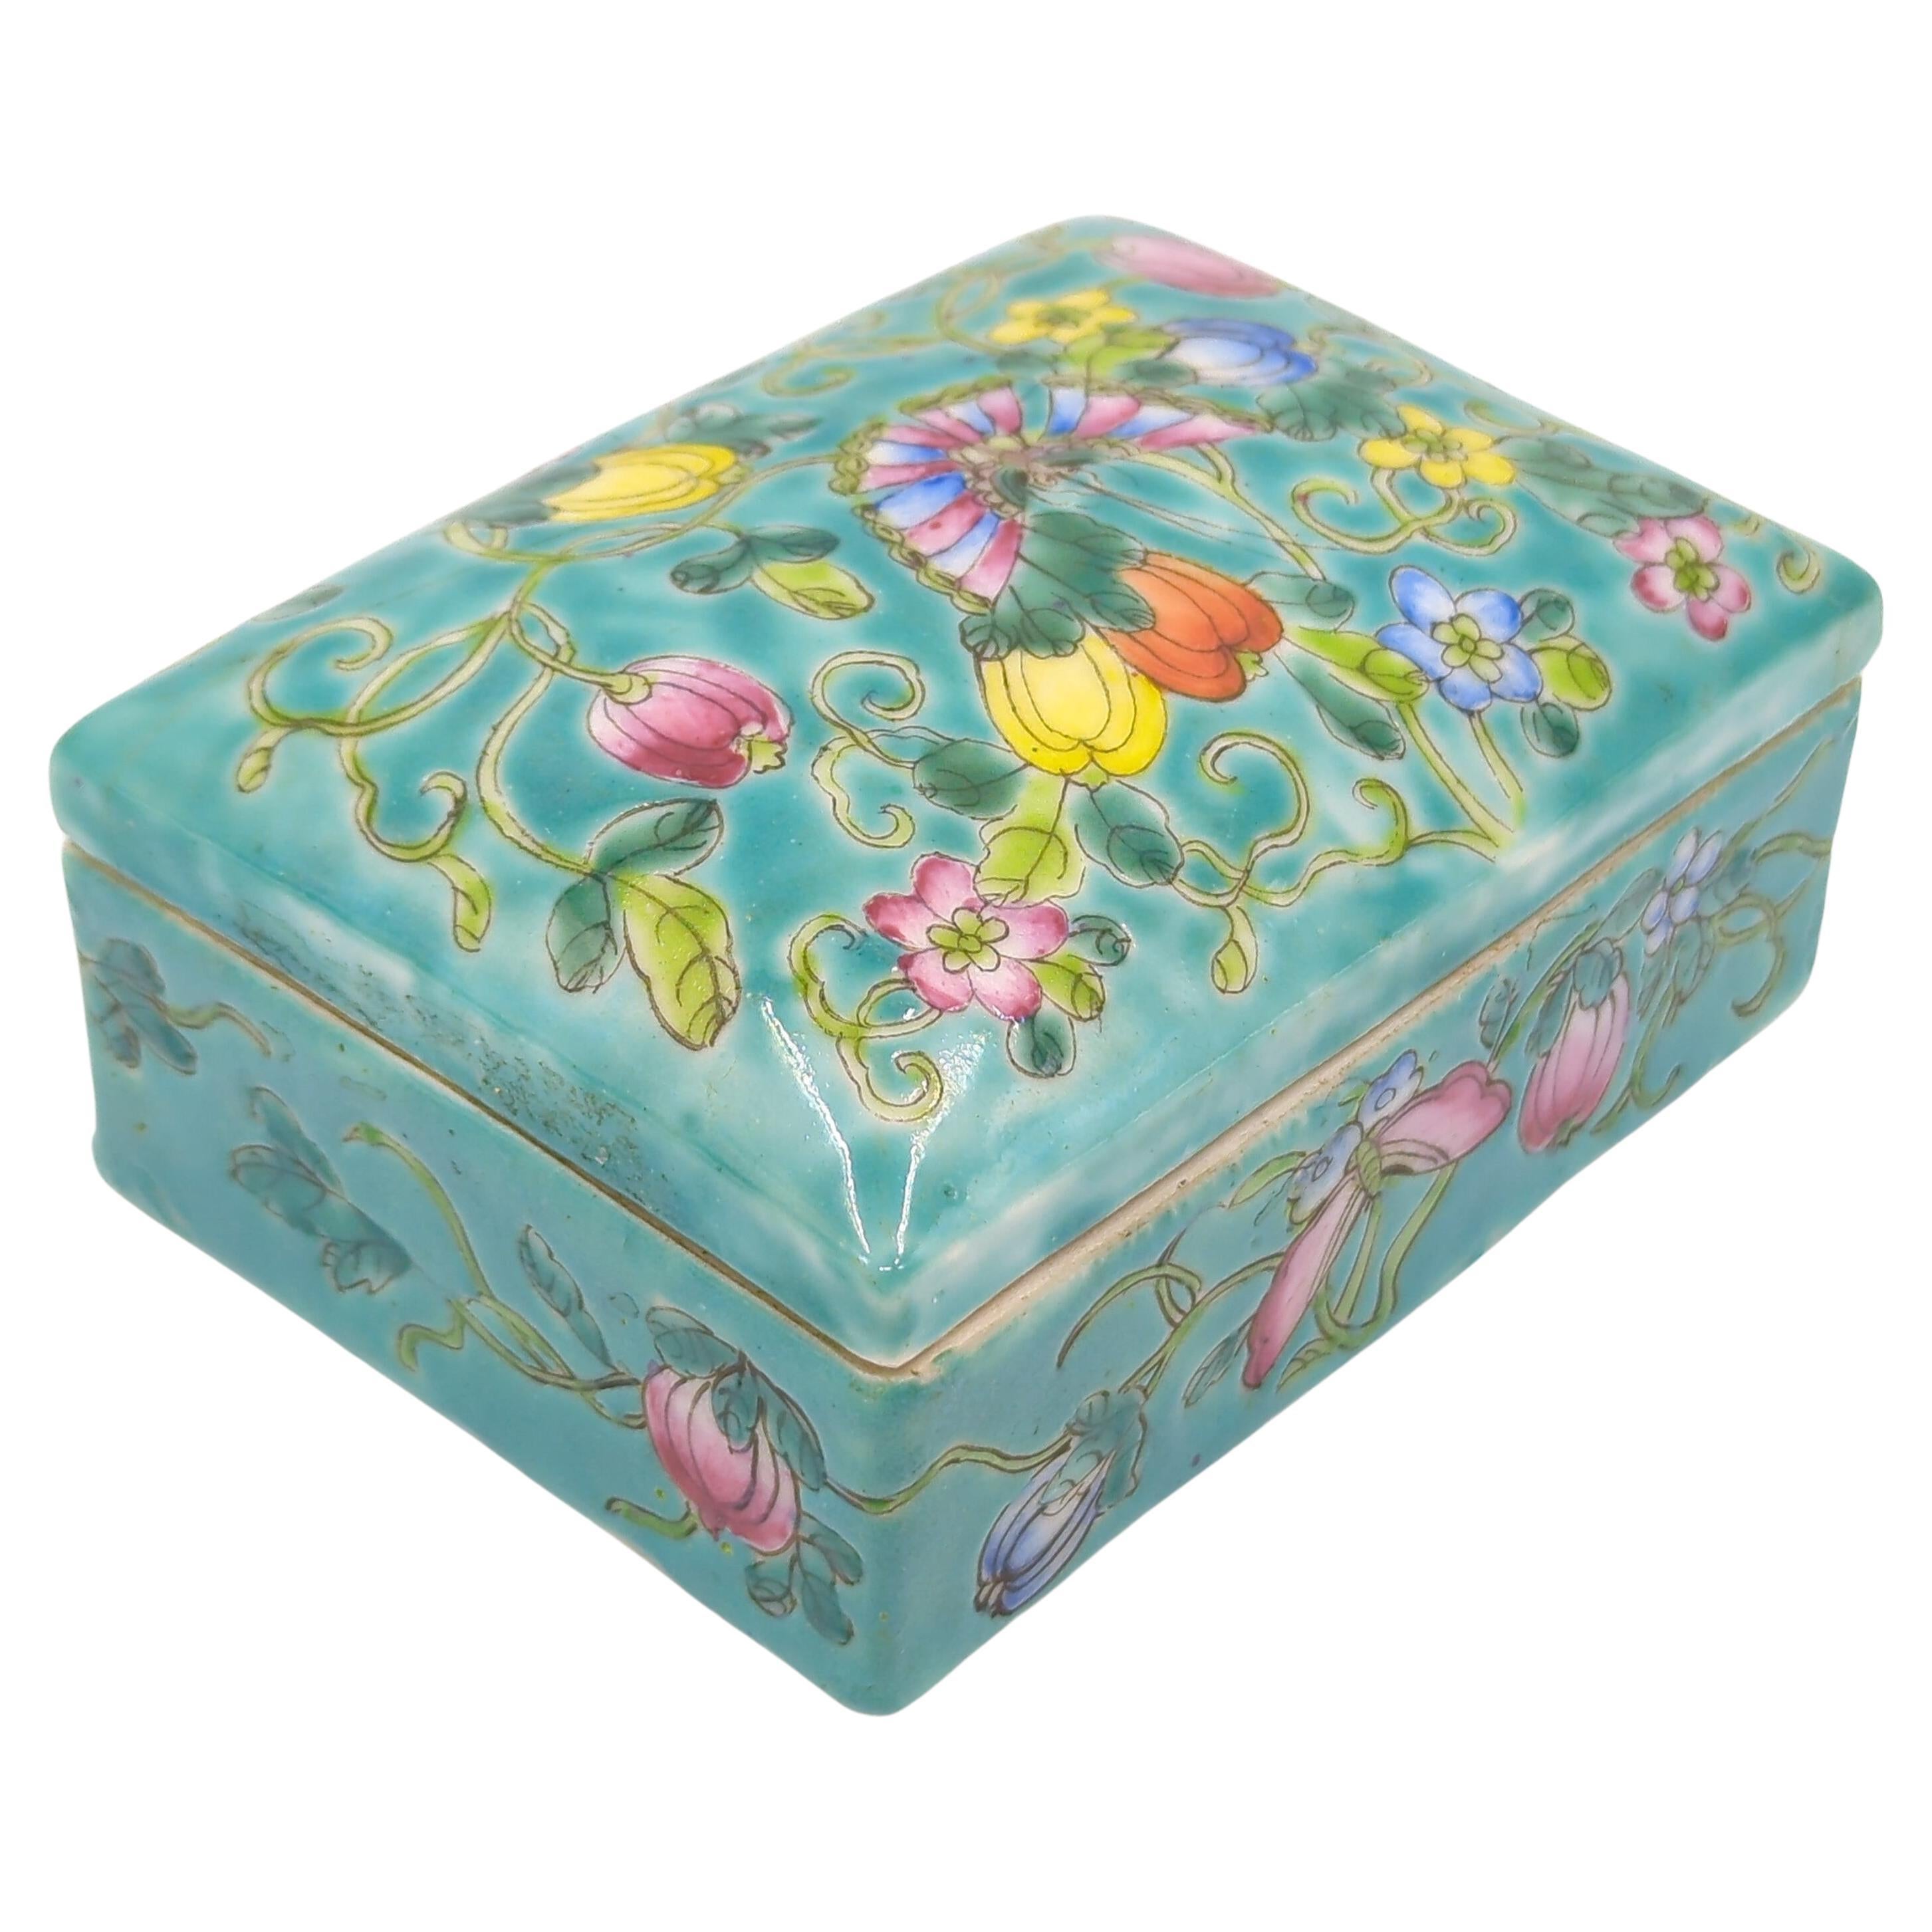 Artisan Antique Chinese Porcelain Turquoise Butterfly Covered Jewelry Box 19/20c  For Sale